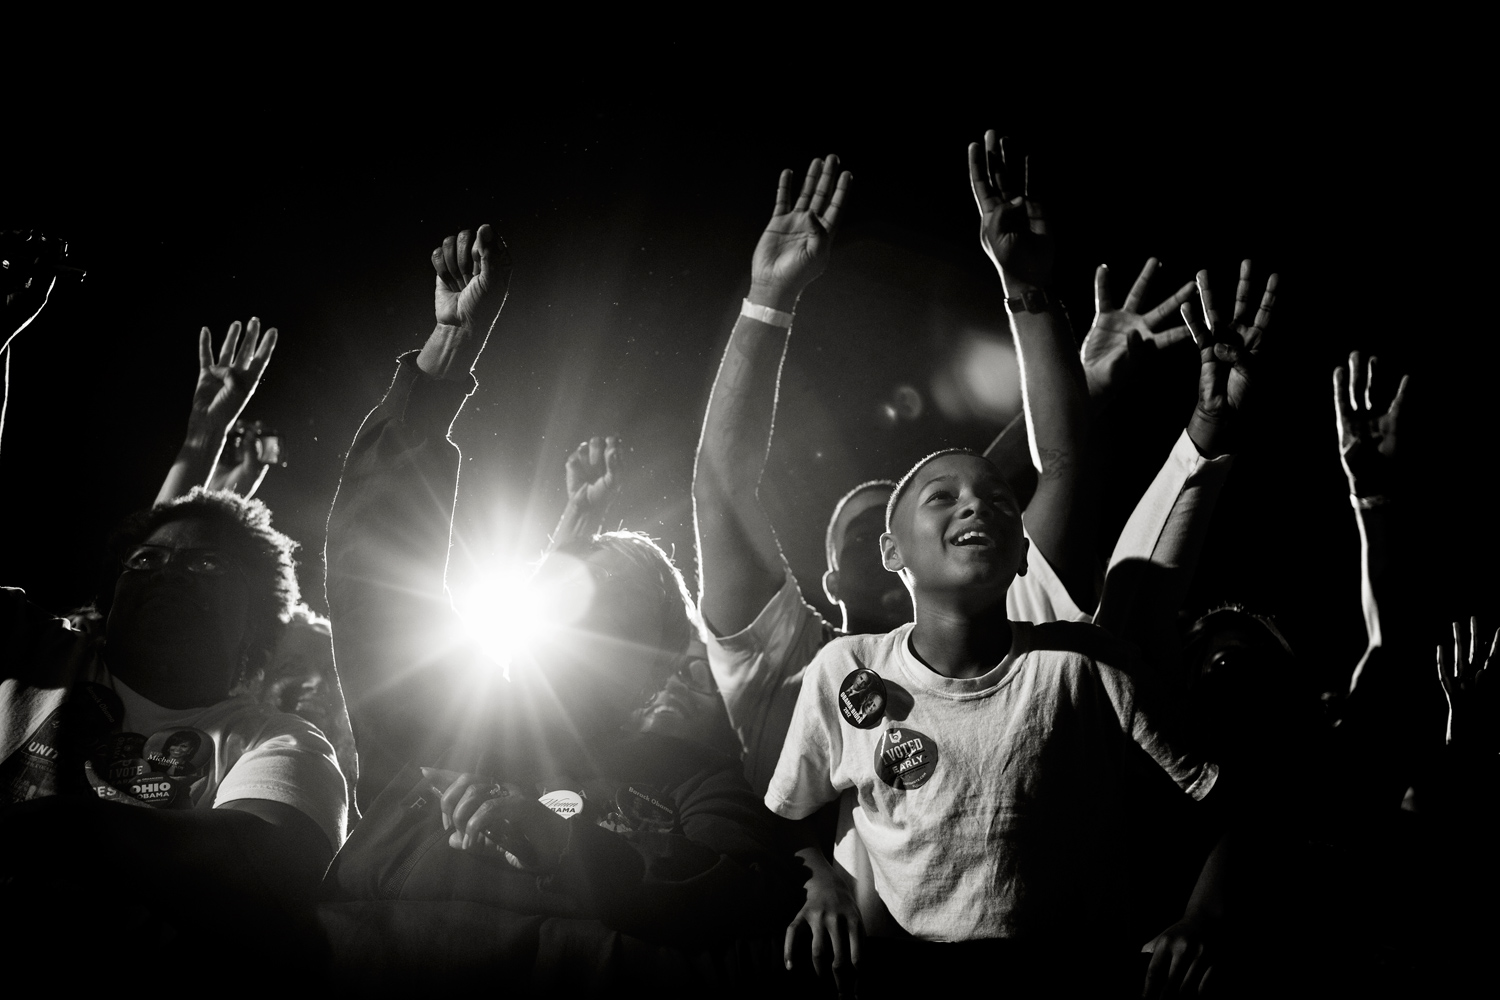 Oct. 25, 2012. Supporters cheer on President Obama at a campaign rally in Cleveland.